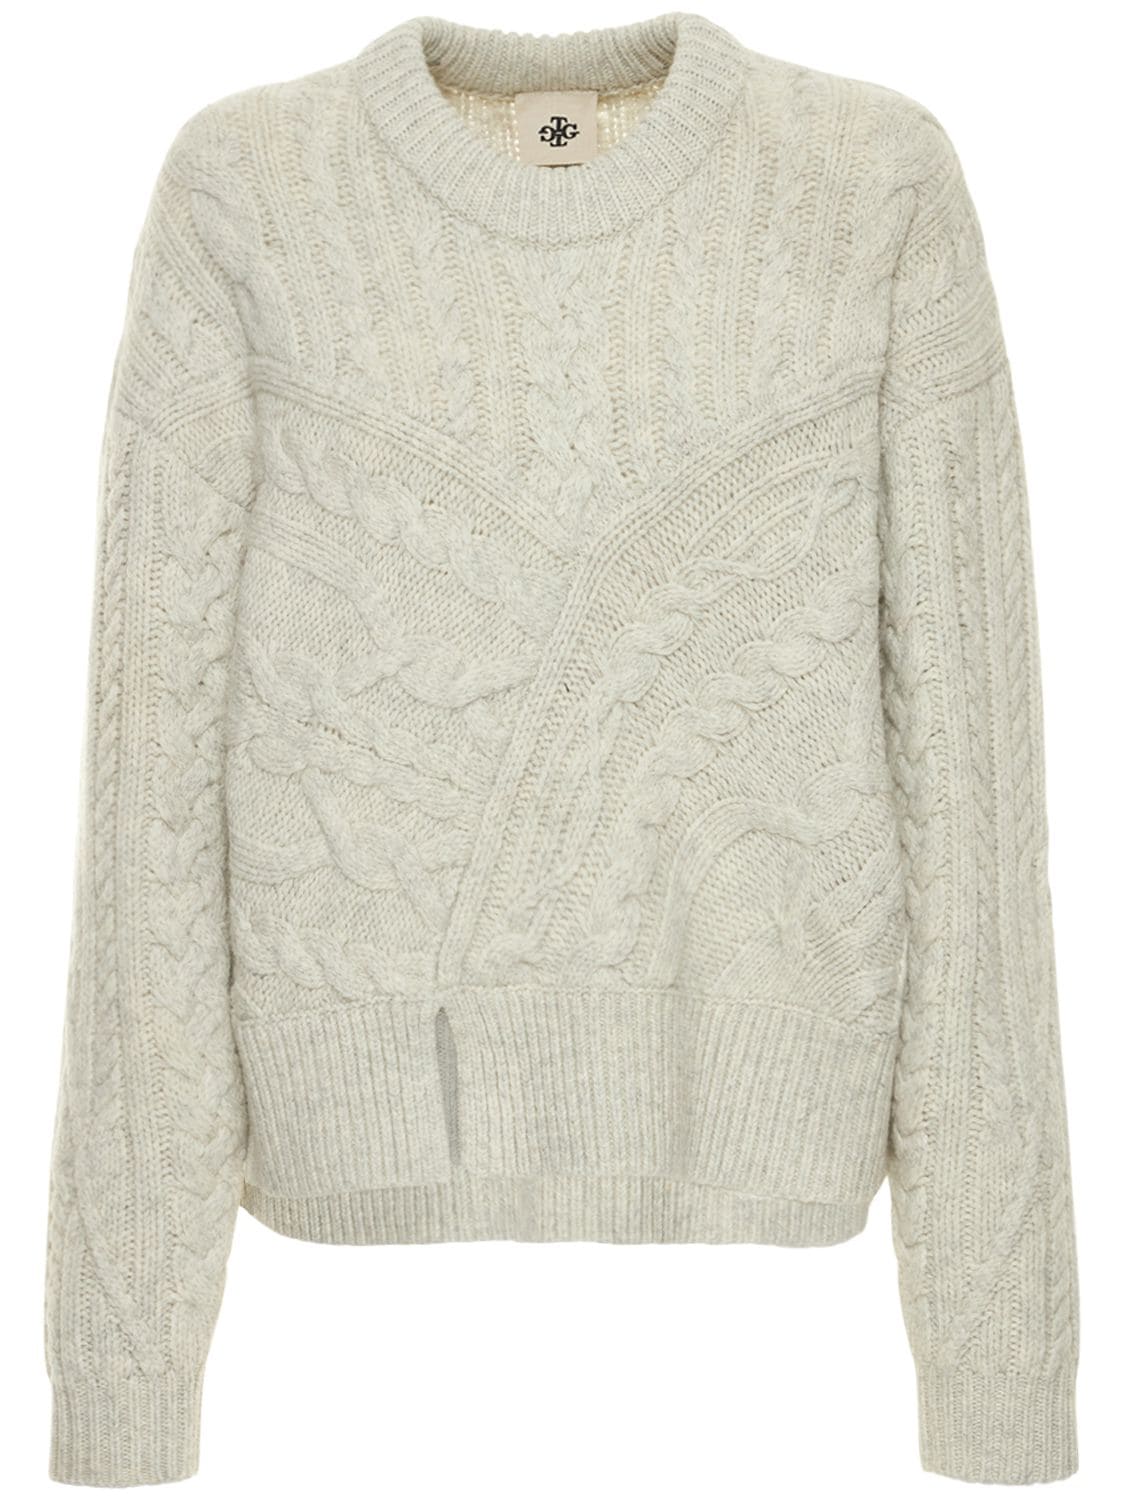 THE GARMENT CANADA KNIT WOOL SWEATER